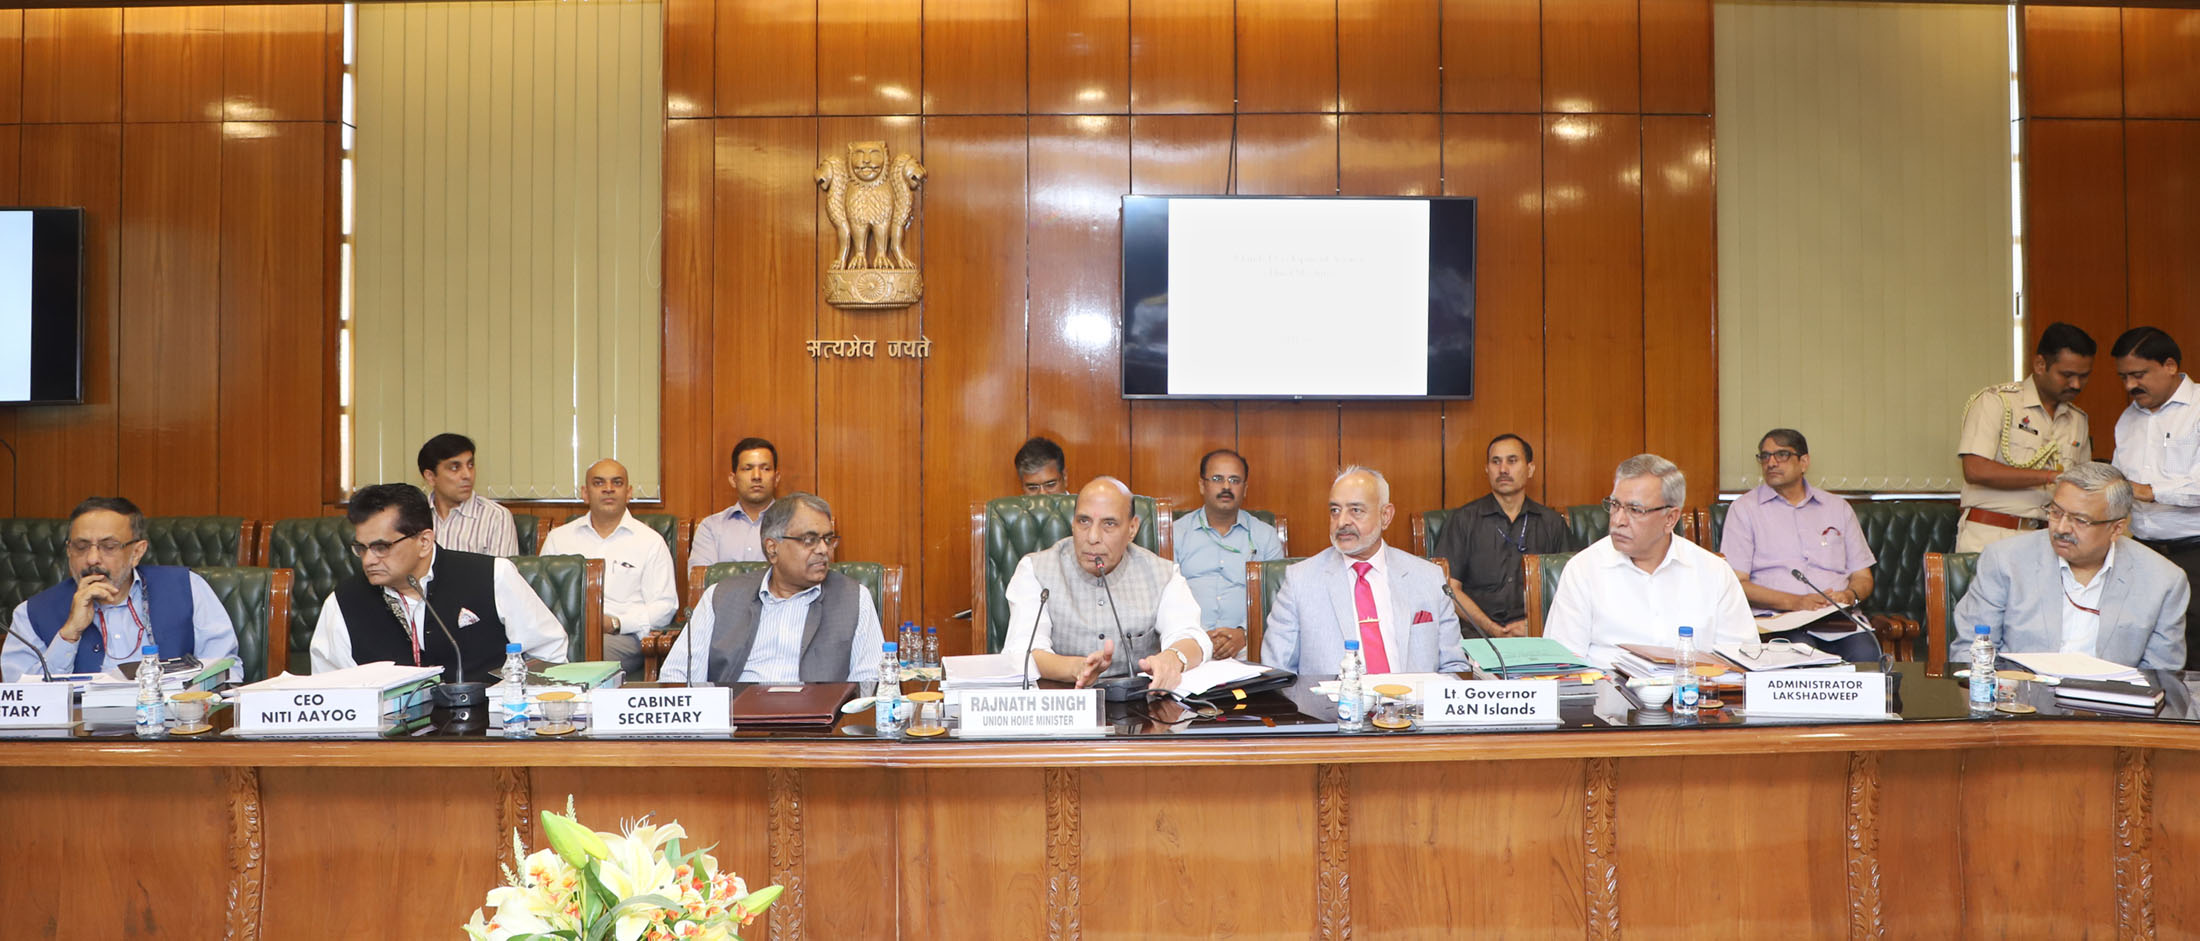 The Union Home Minister, Shri Rajnath Singh reviews the progress of development projects at the third meeting of Island Development Agency (IDA), in New Delhi on April 24, 2018. The Cabinet Secretary, Shri P.K. Sinha, the CEO, NITI Aayog, Shri Amitabh Kant, the Lt. Governor of Andaman & Nicobar Islands, Admiral (Retd), D.K. Joshi, the Union Home Secretary, Shri Rajiv Gauba and the senior officials of Union Ministries and UTs are also seen.